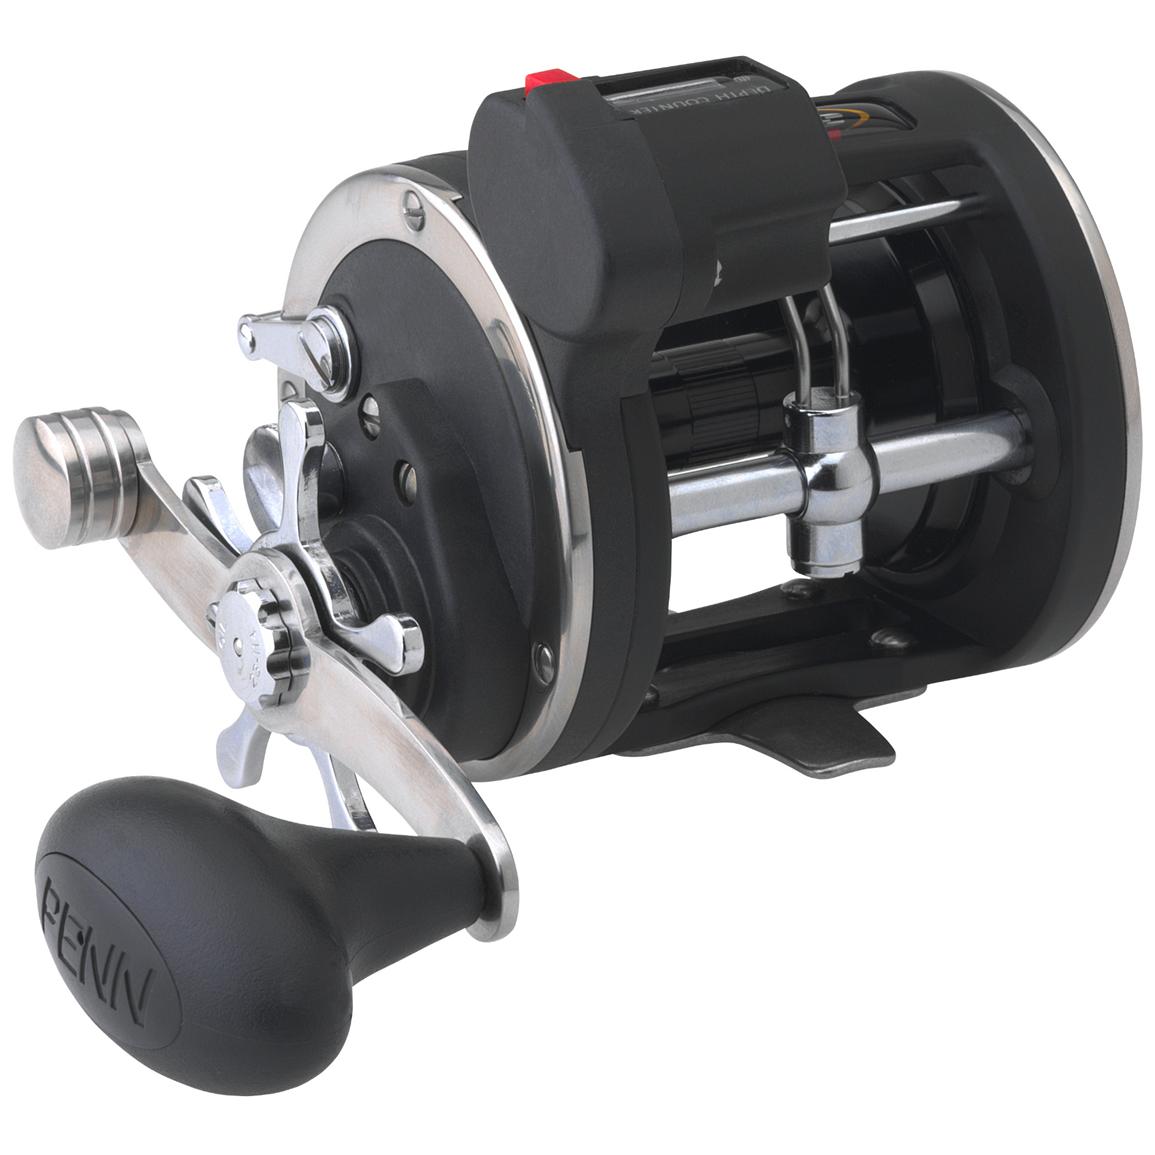 Penn Gt Level Wind Fishing Reel With Line Counter